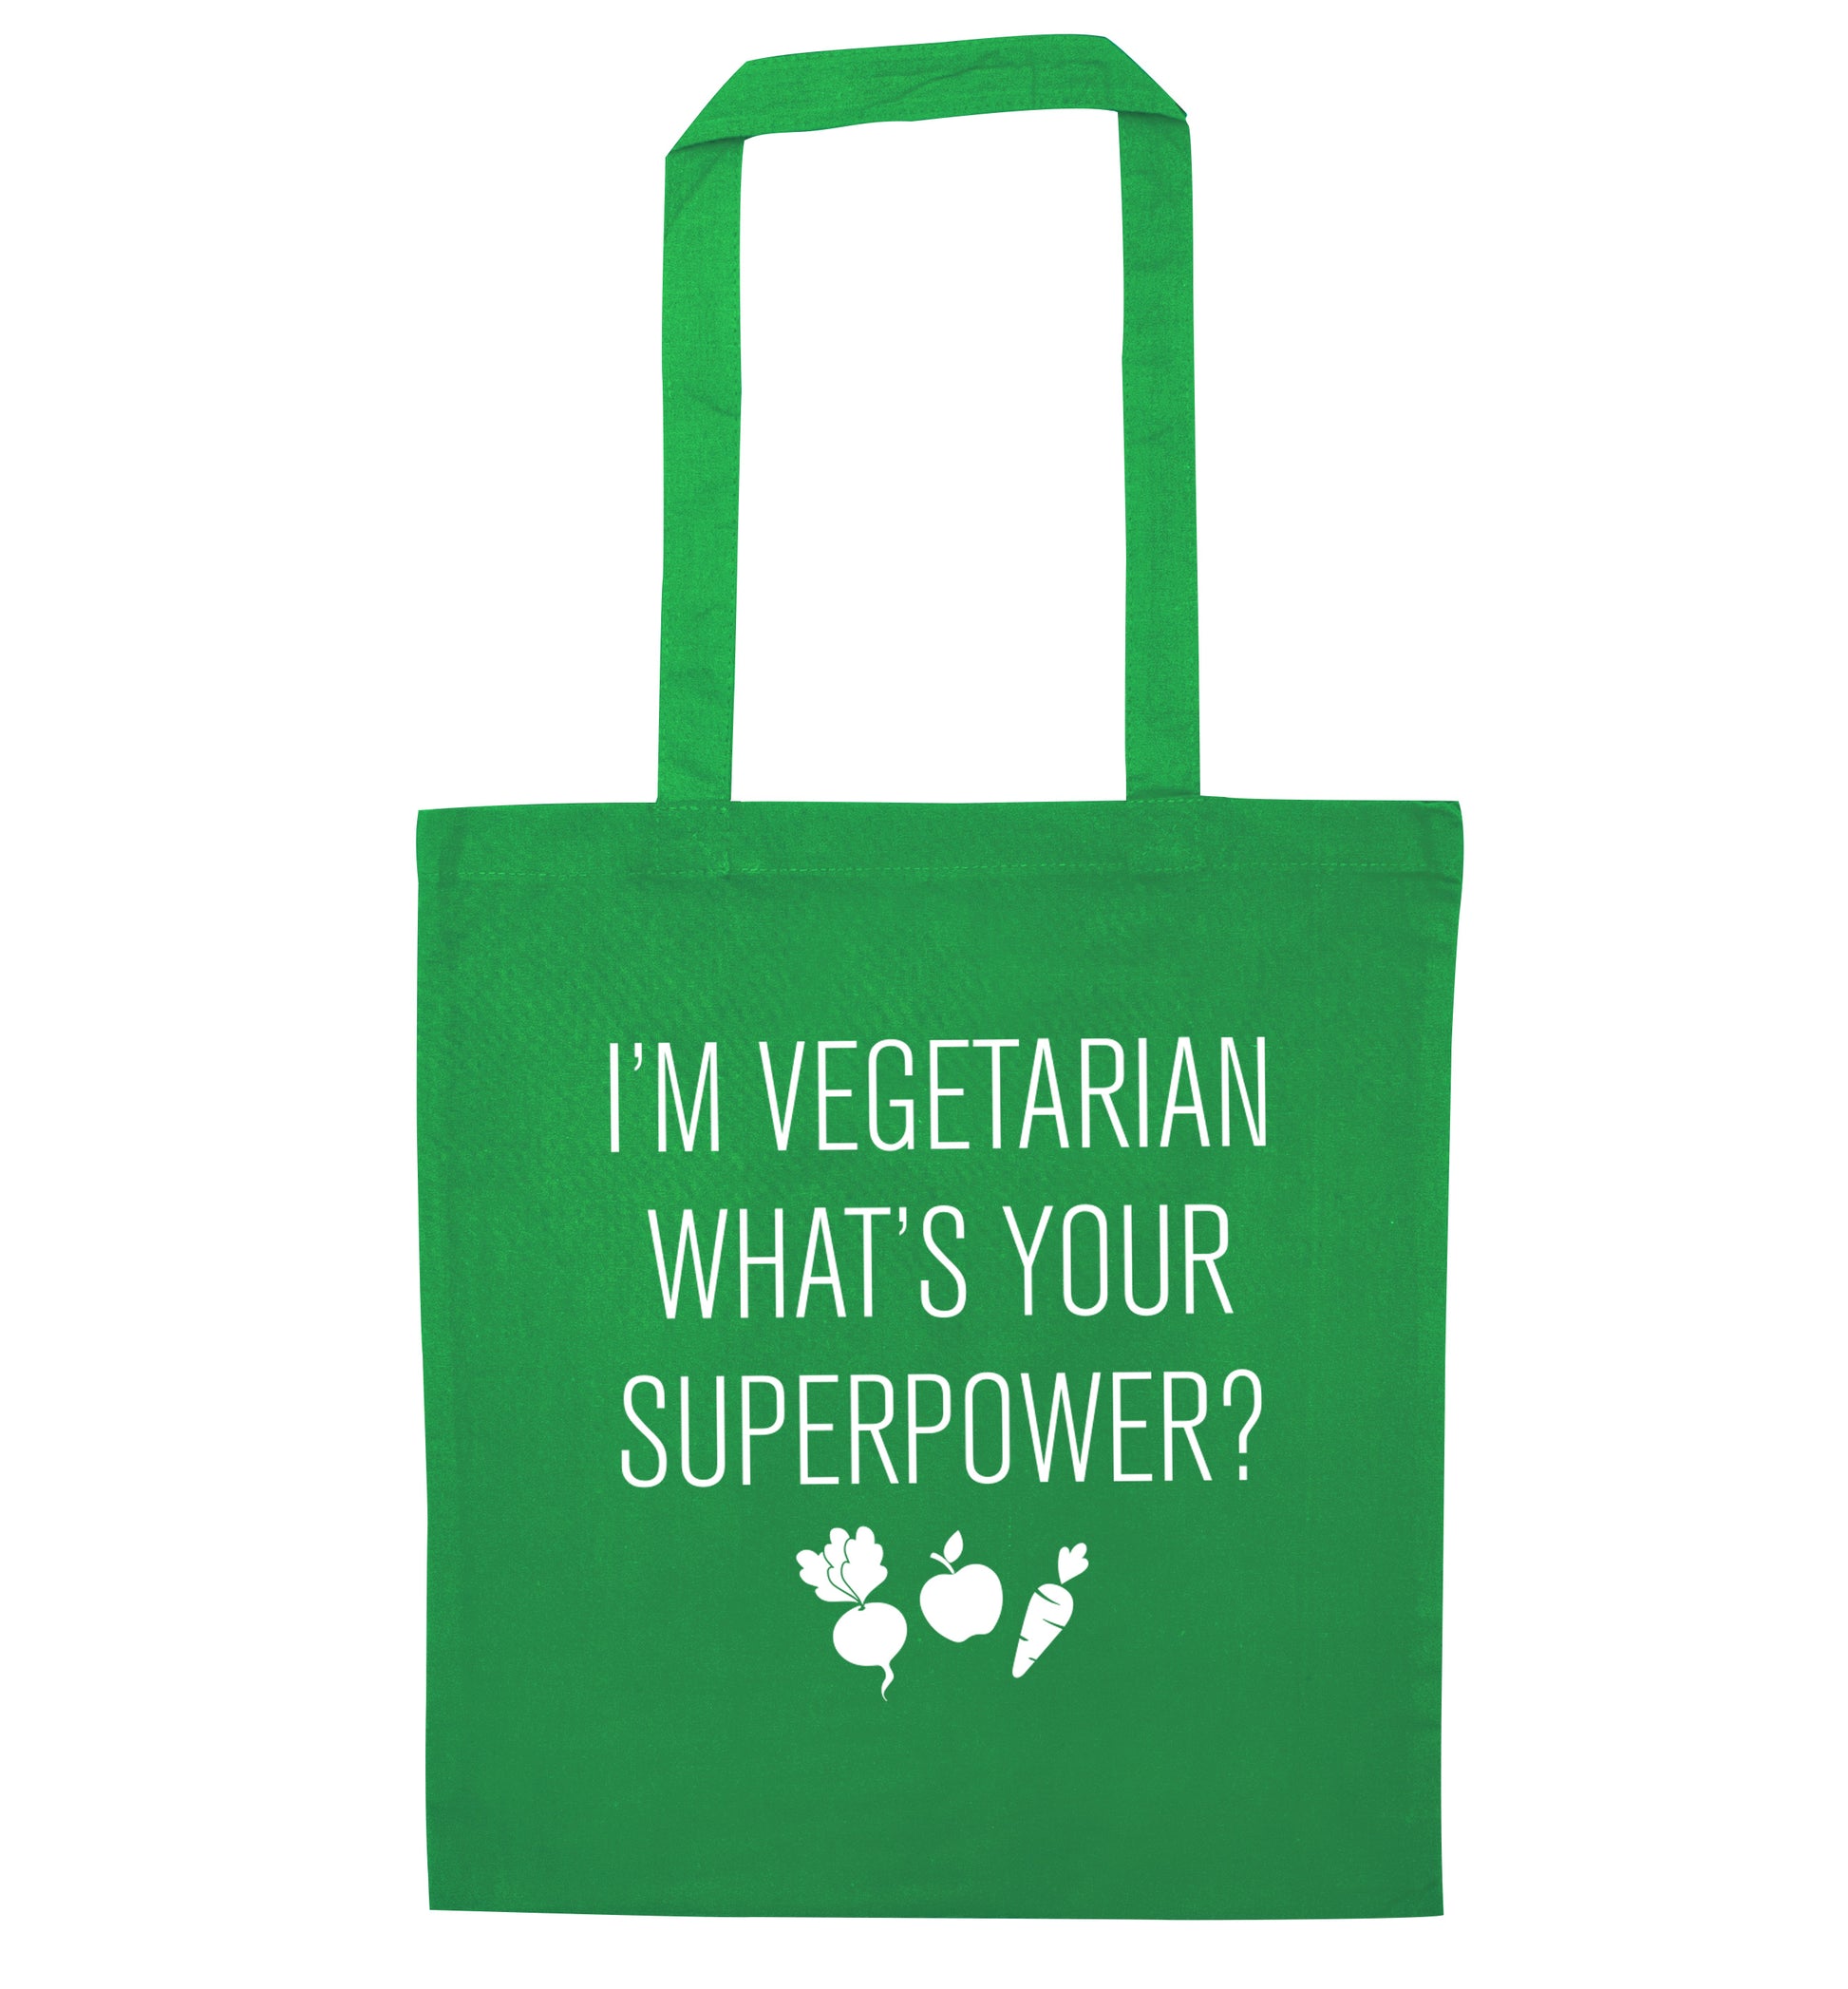 I'm vegetarian what's your superpower? green tote bag